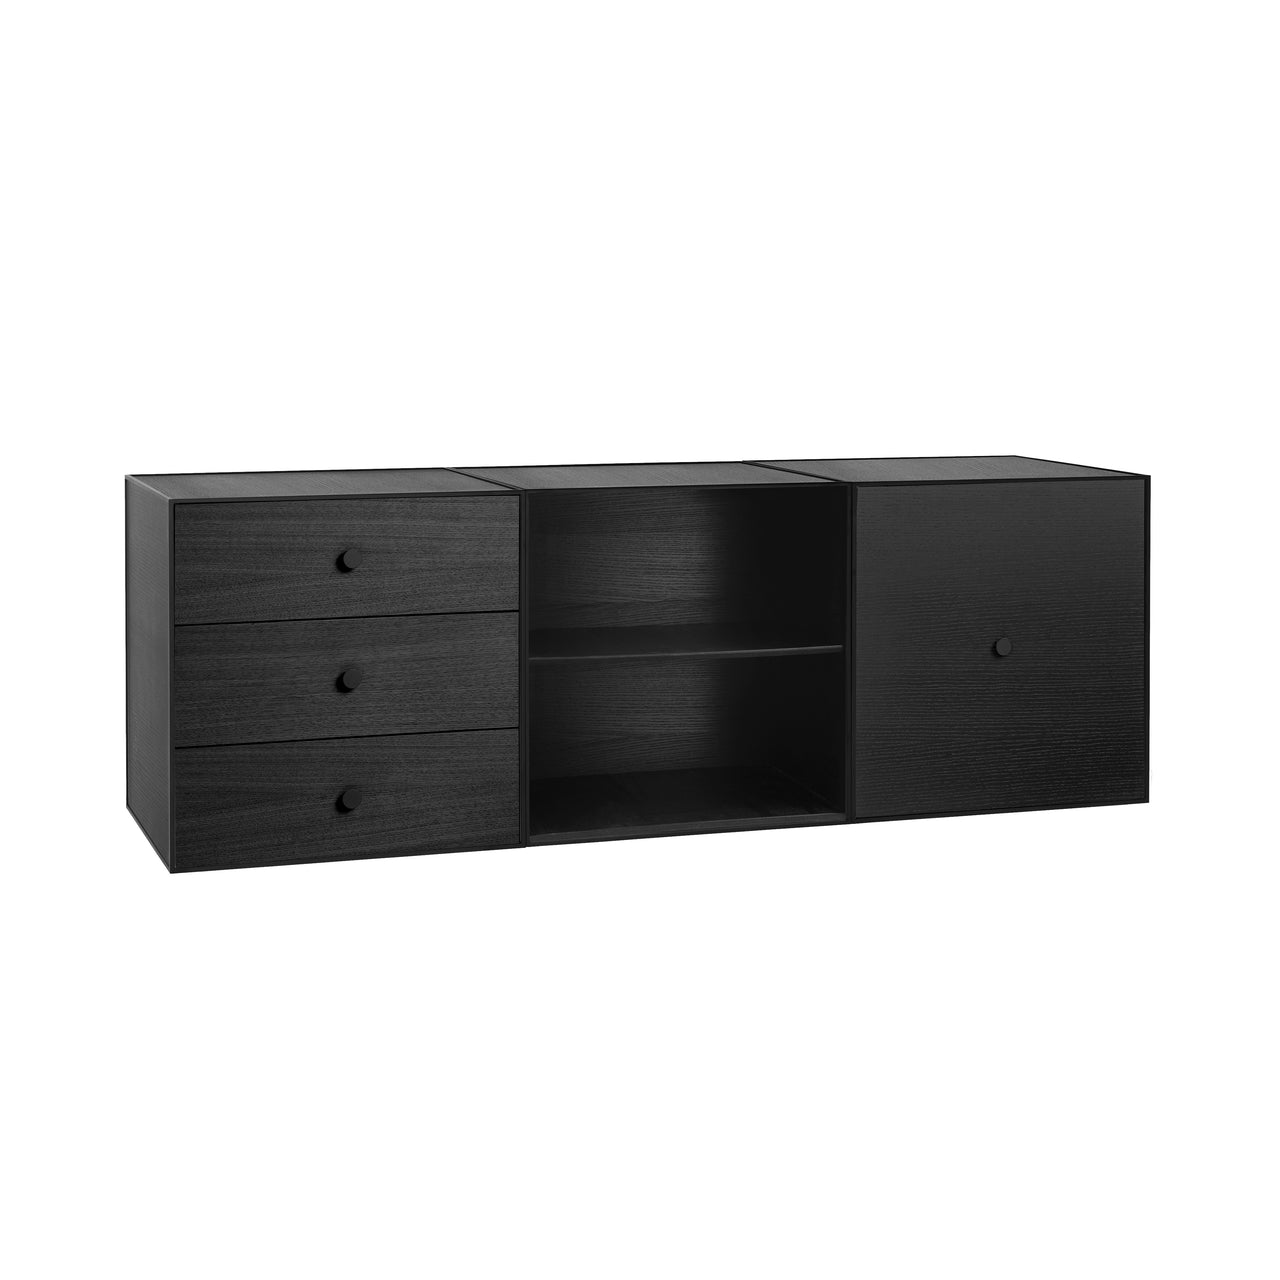 Frame Sideboard Trio: Storage 49 + Black Stained Ash